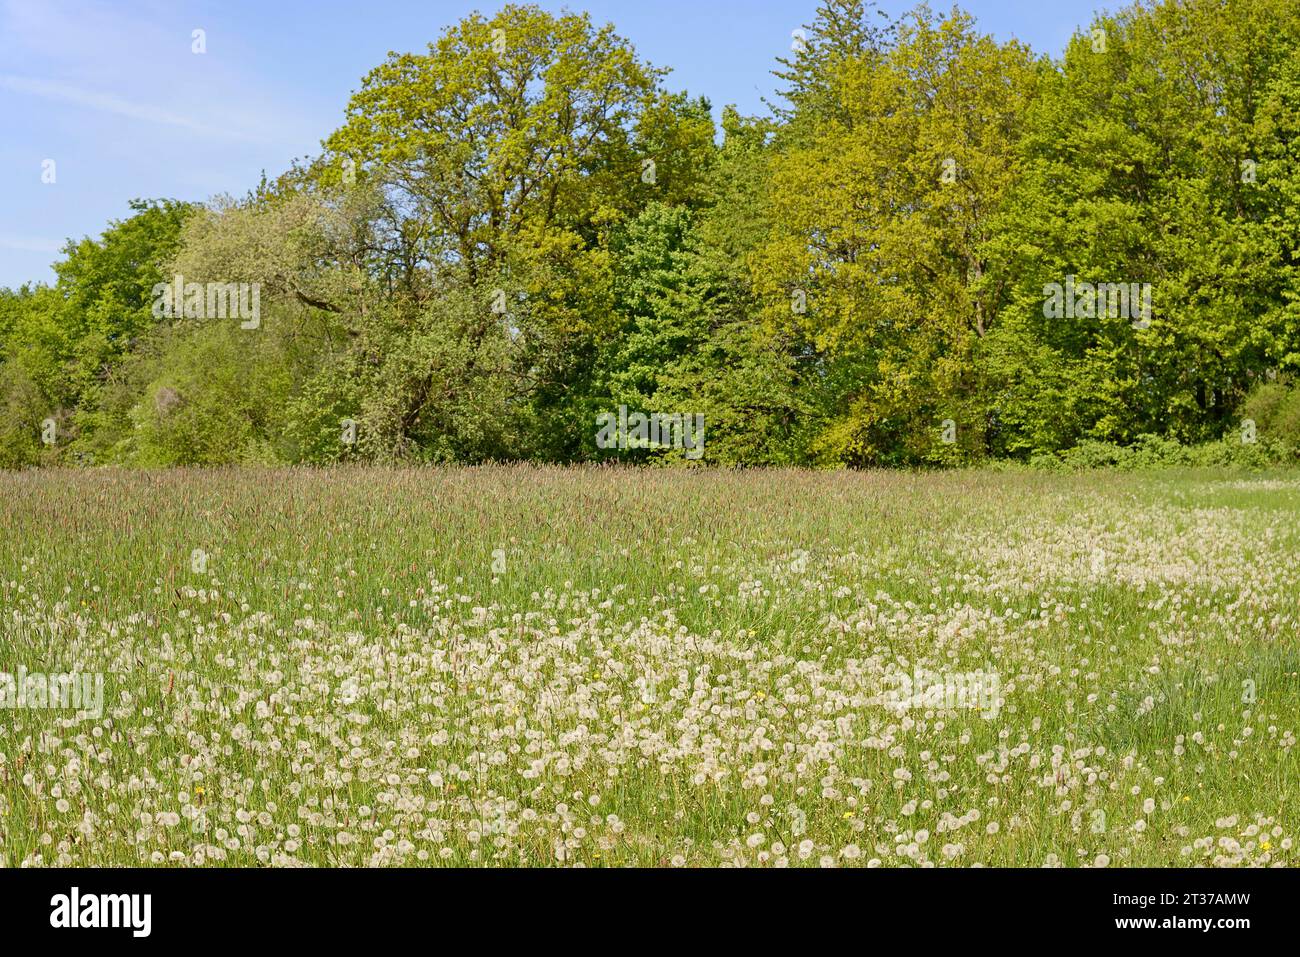 Meadow with sweet grass Meadow foxtail (Alopecurus pratensis), common dandelion (Taraxacum sect. Ruderalia) with fruiting plants, North Stock Photo